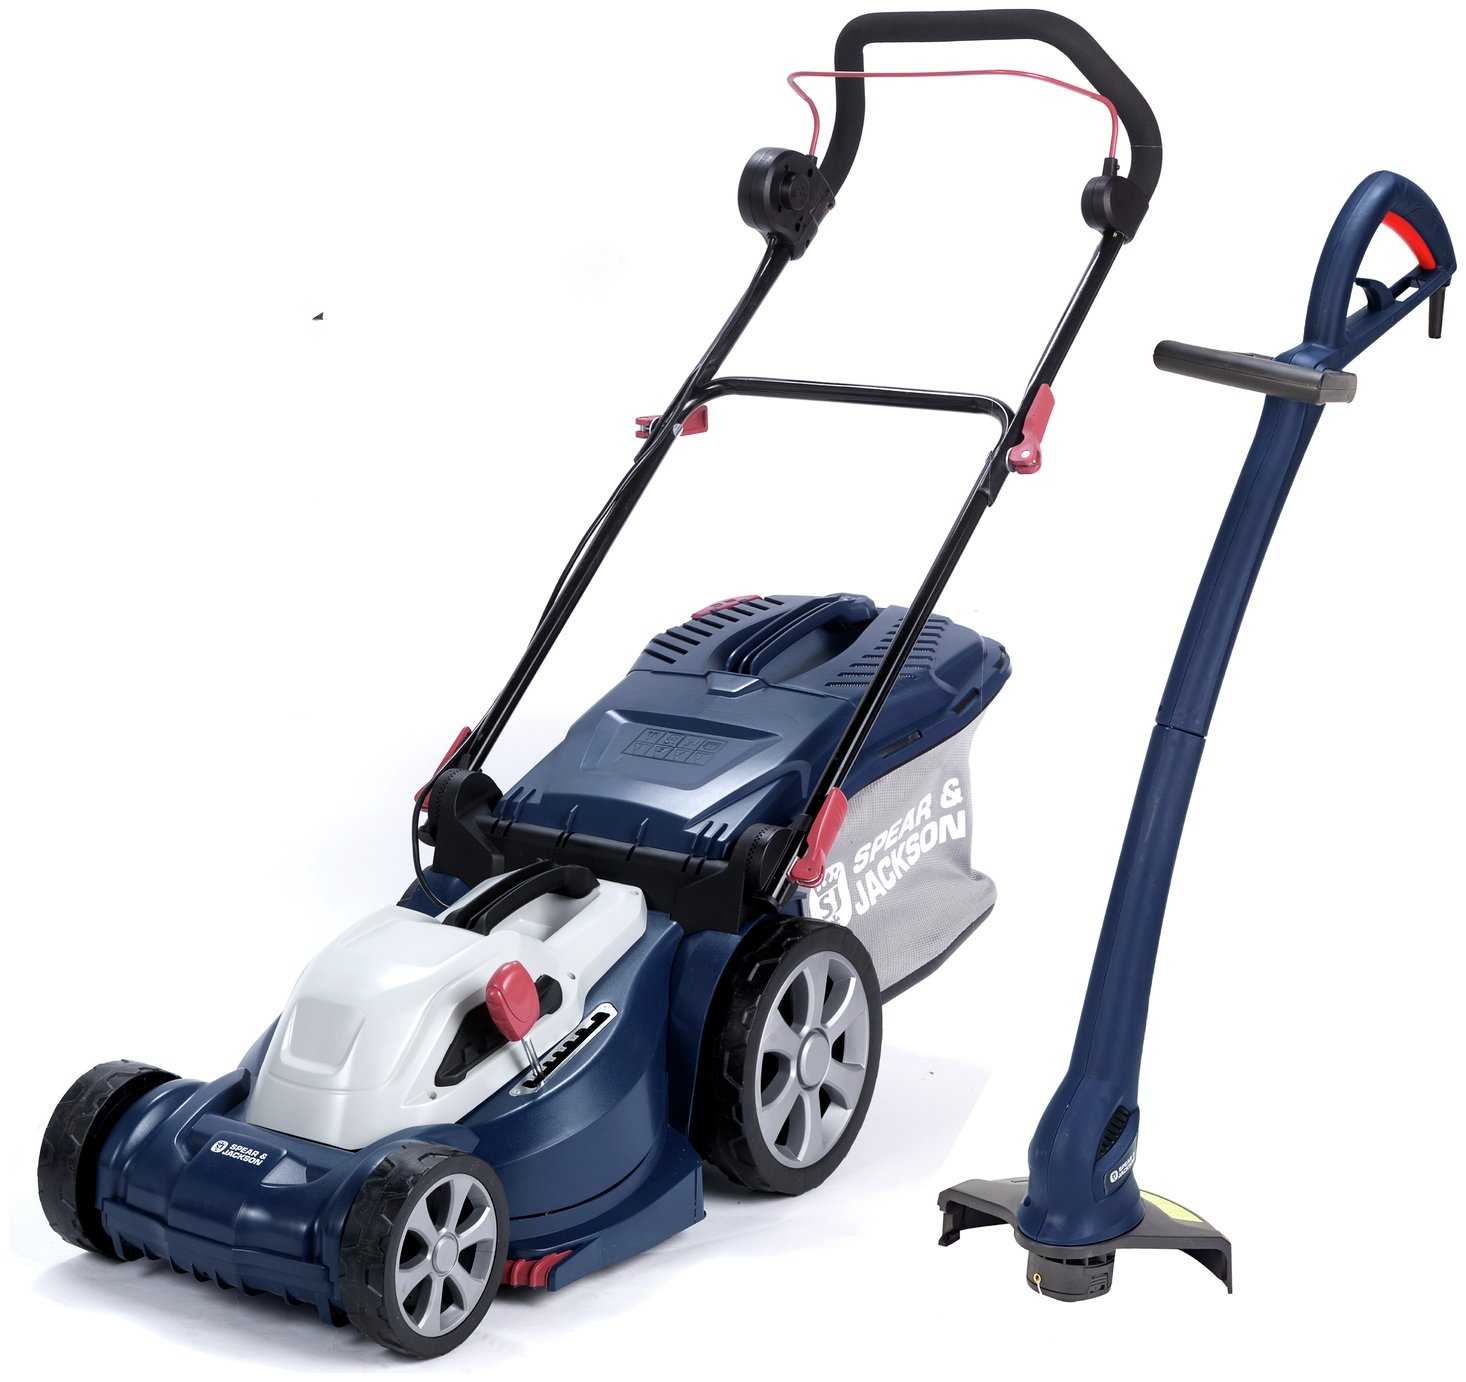 Spear & Jackson 36cm Corded Lawnmower 1400W and Trimmer 350W review